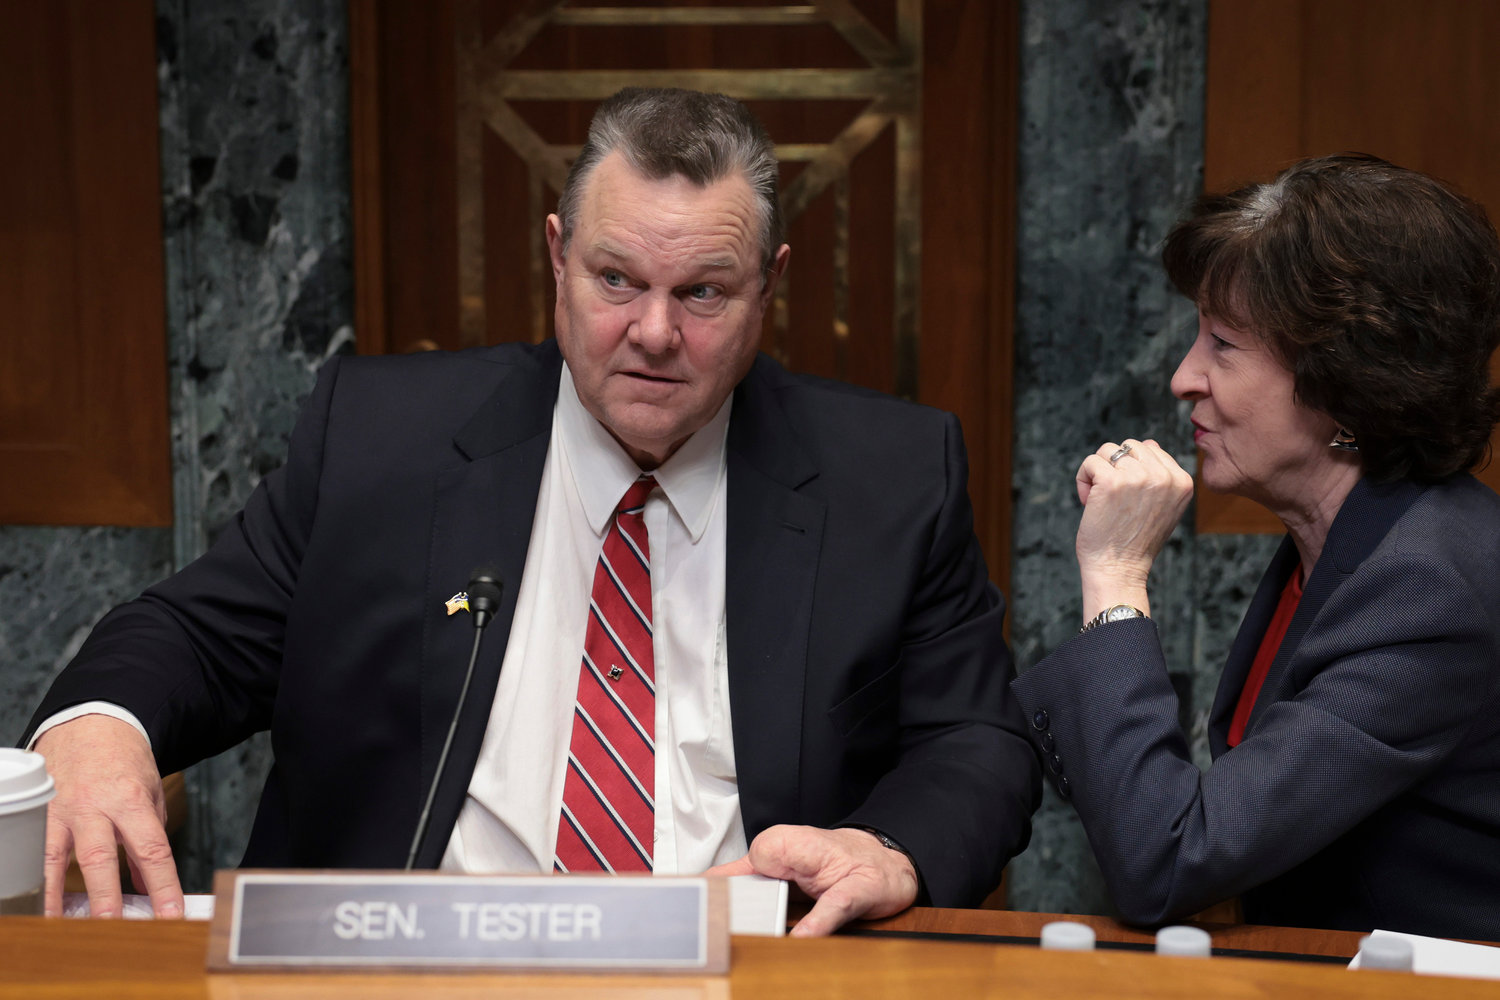 Committee Chairman Sen. Jon Tester (D-Montana), left, confers with Sen. Susan Collins (R-Maine) after a panel testified before the Senate Appropriations Subcommittee on Defense on China's high altitude balloon surveillance efforts against the United States Feb. 9, 2023, in Washington, D.C. (Win McNamee/Getty Images/TNS)